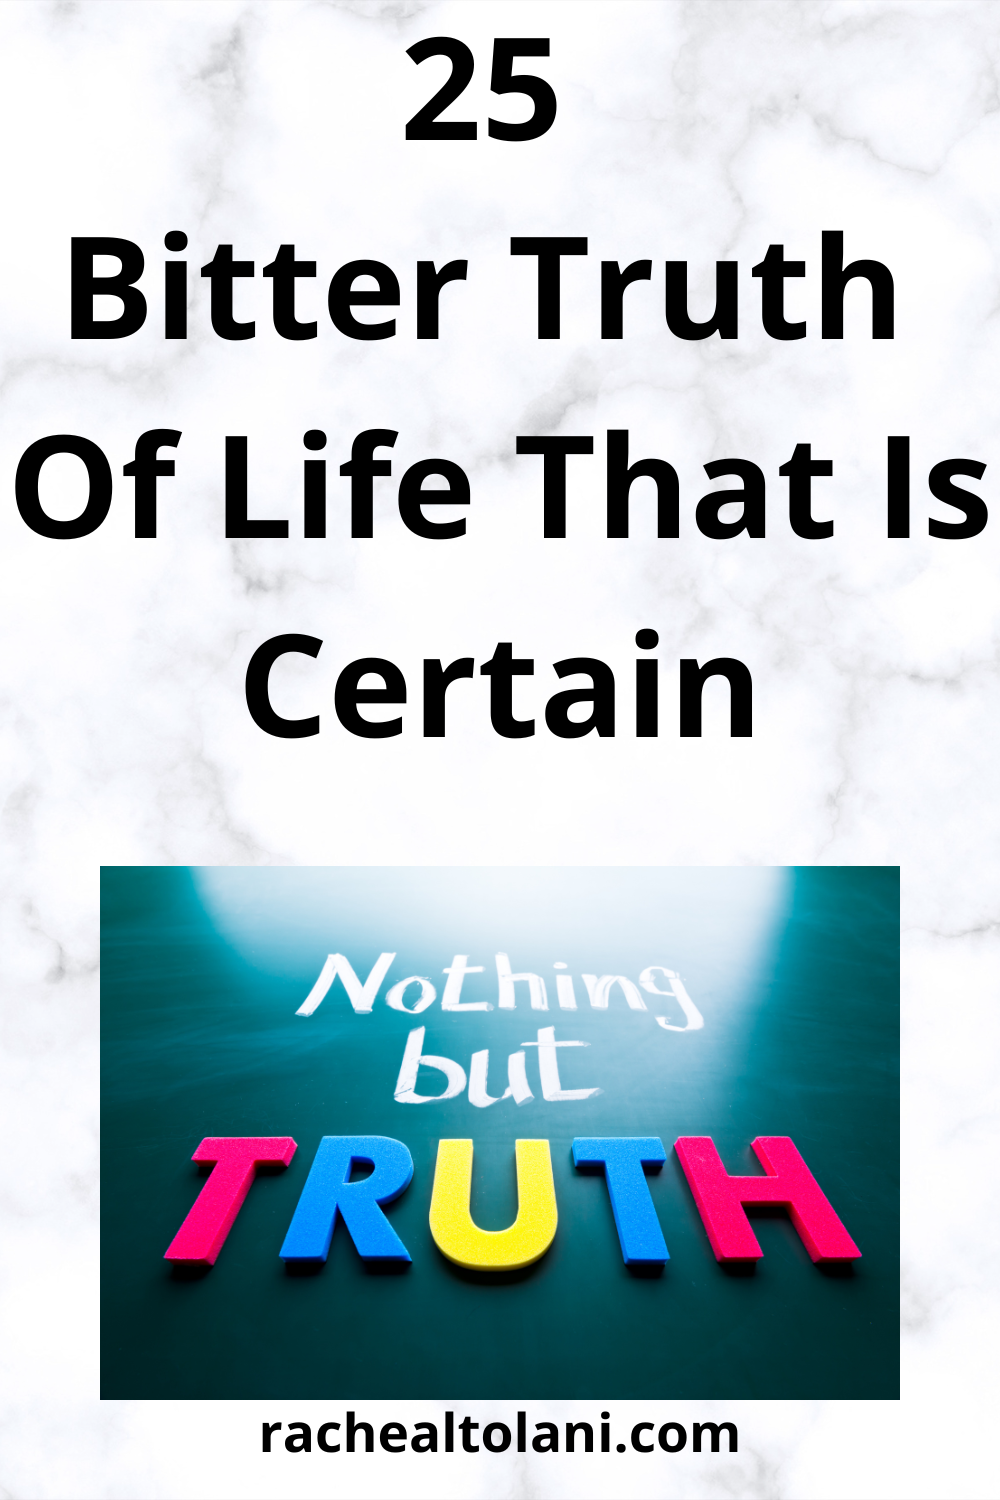 Bitter truth of life